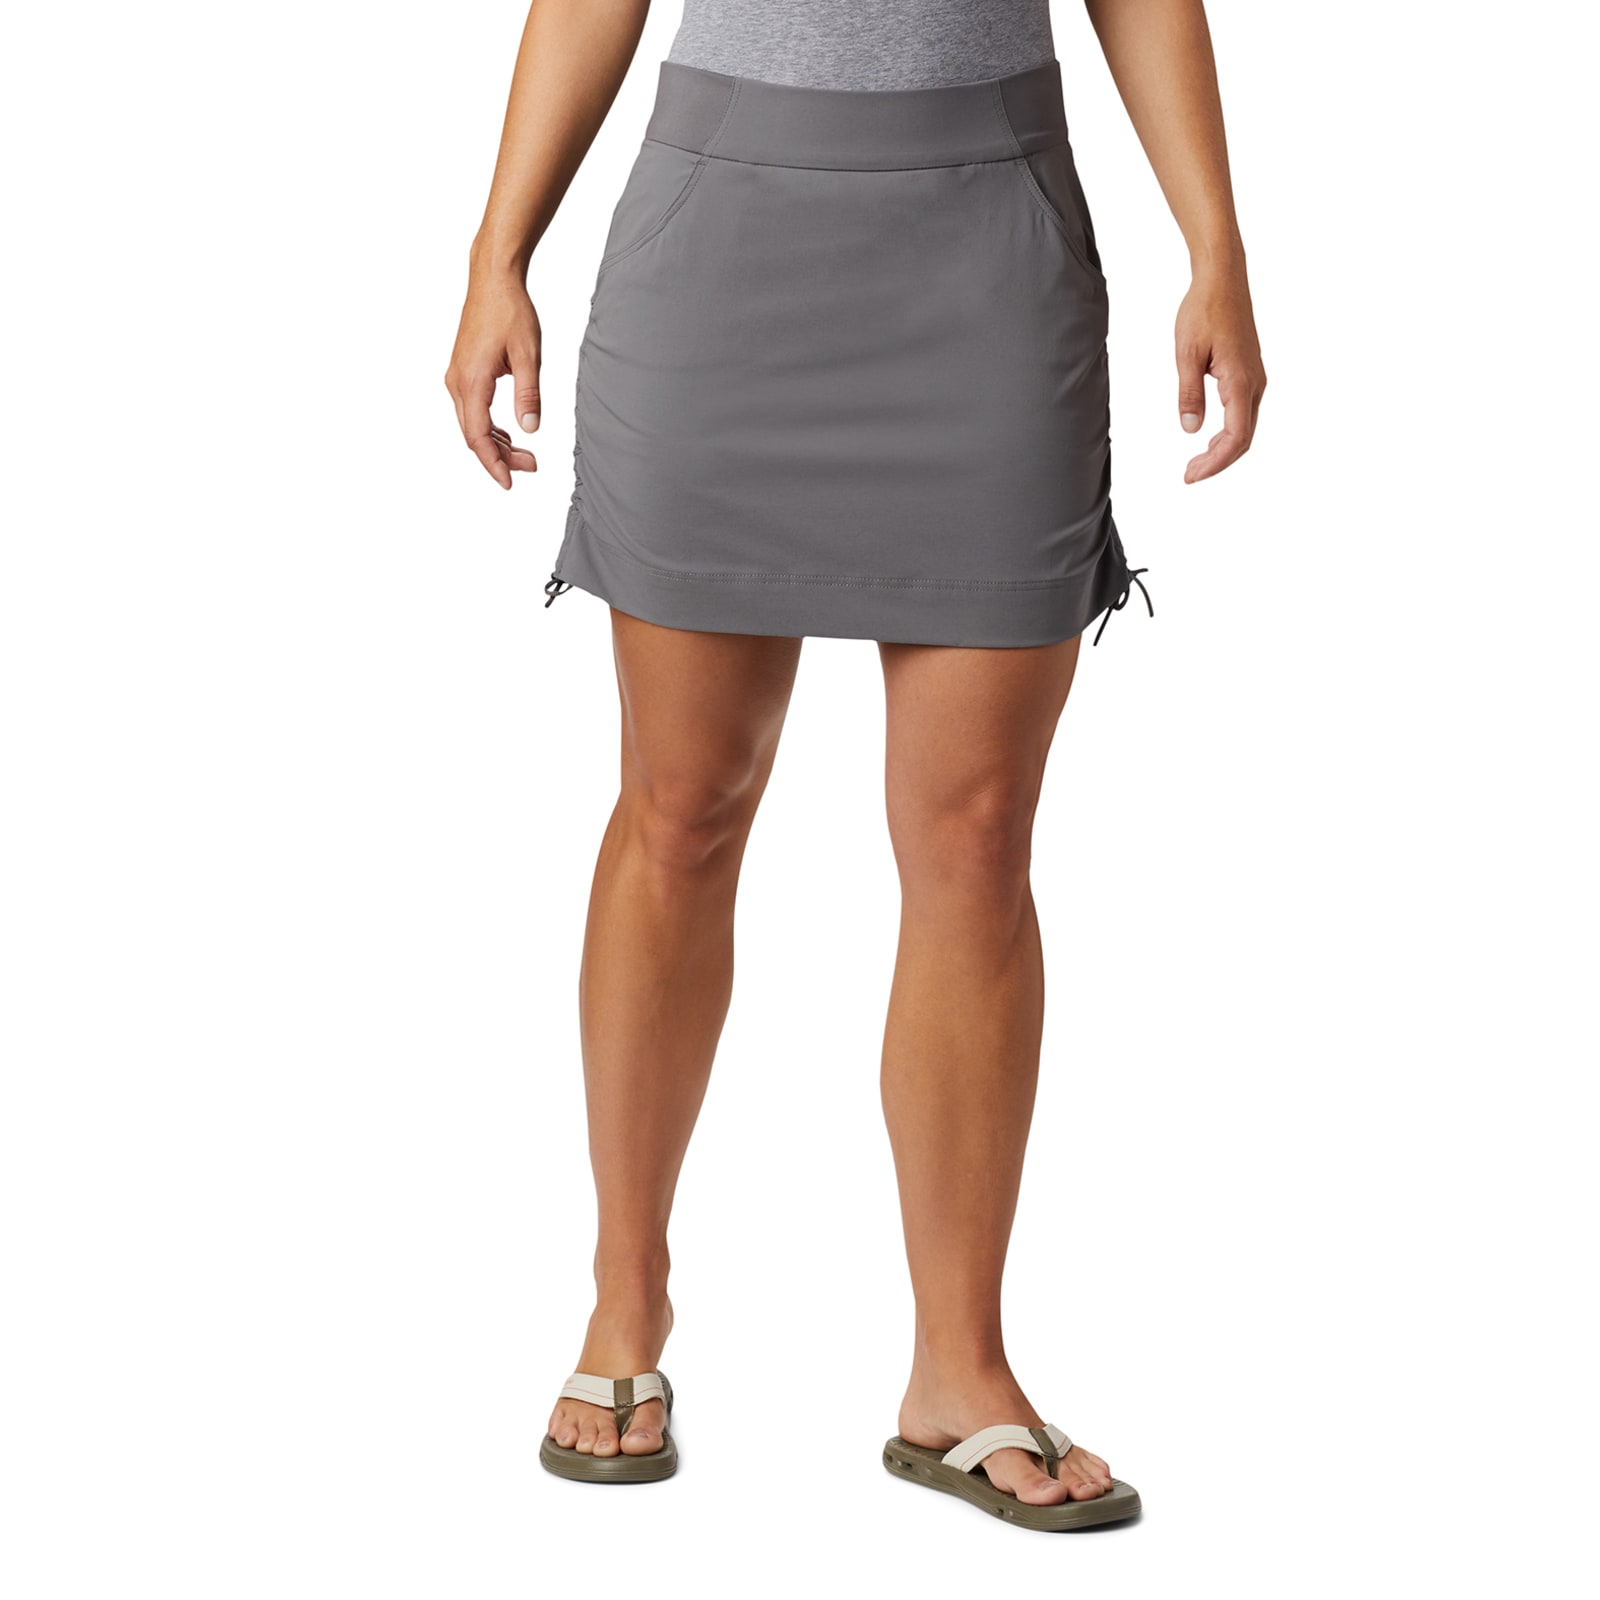 Anytime Casual City Grey Skort by Columbia at Fleet Farm